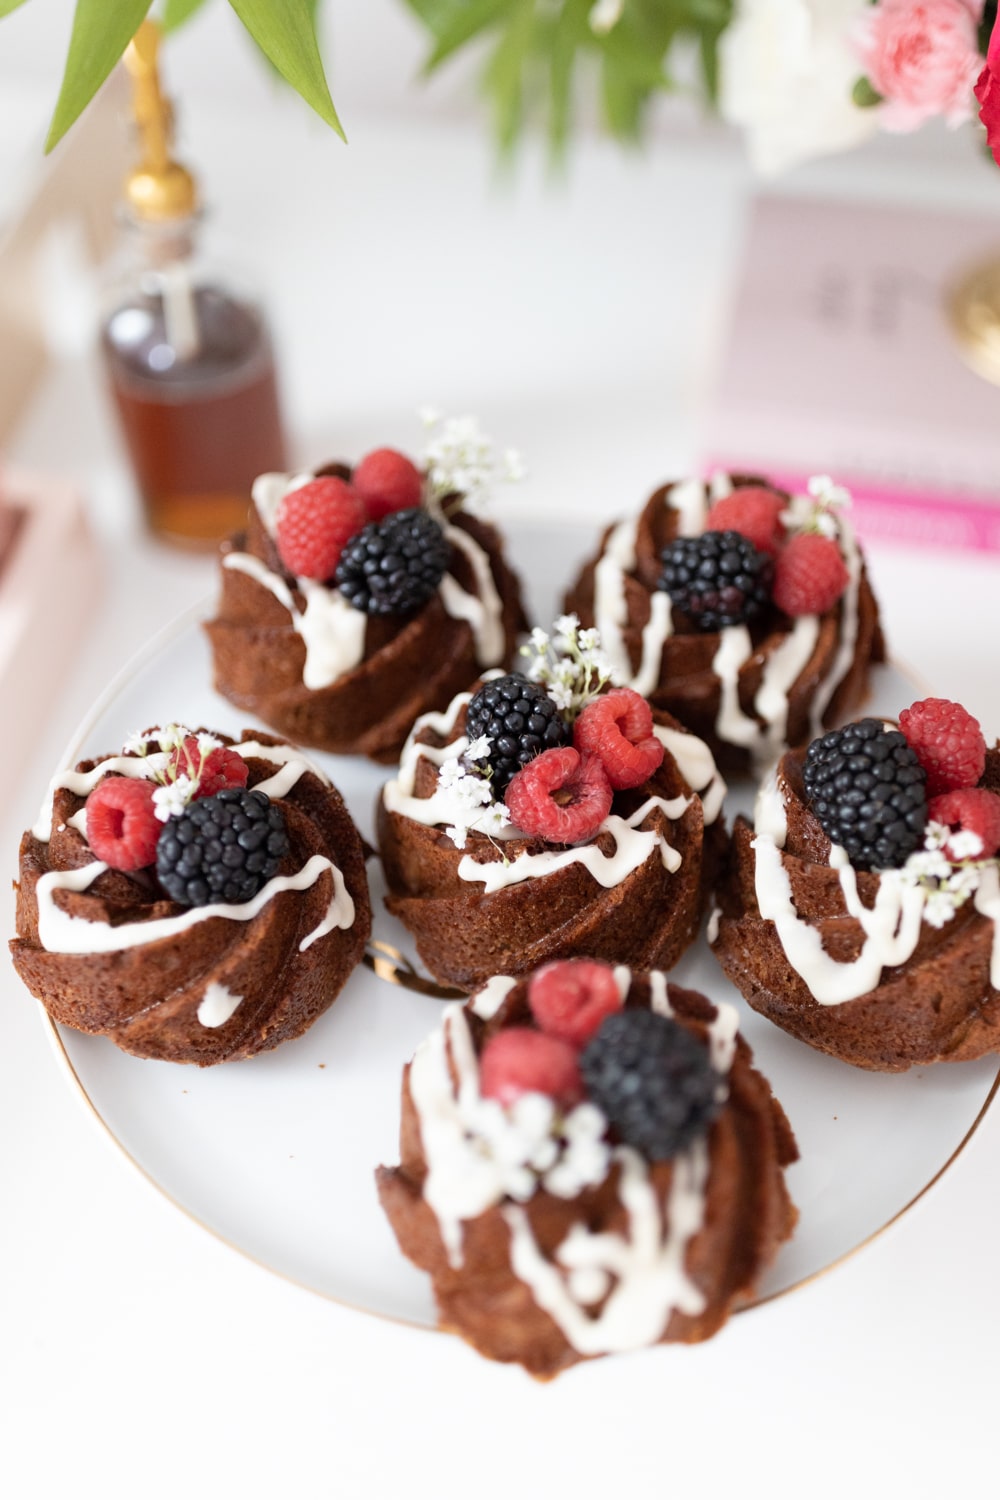 Mini coffee cakes baked as part of a Galentine's Day brunch menu by blogger Stephanie Ziajka on Diary of a Debutante